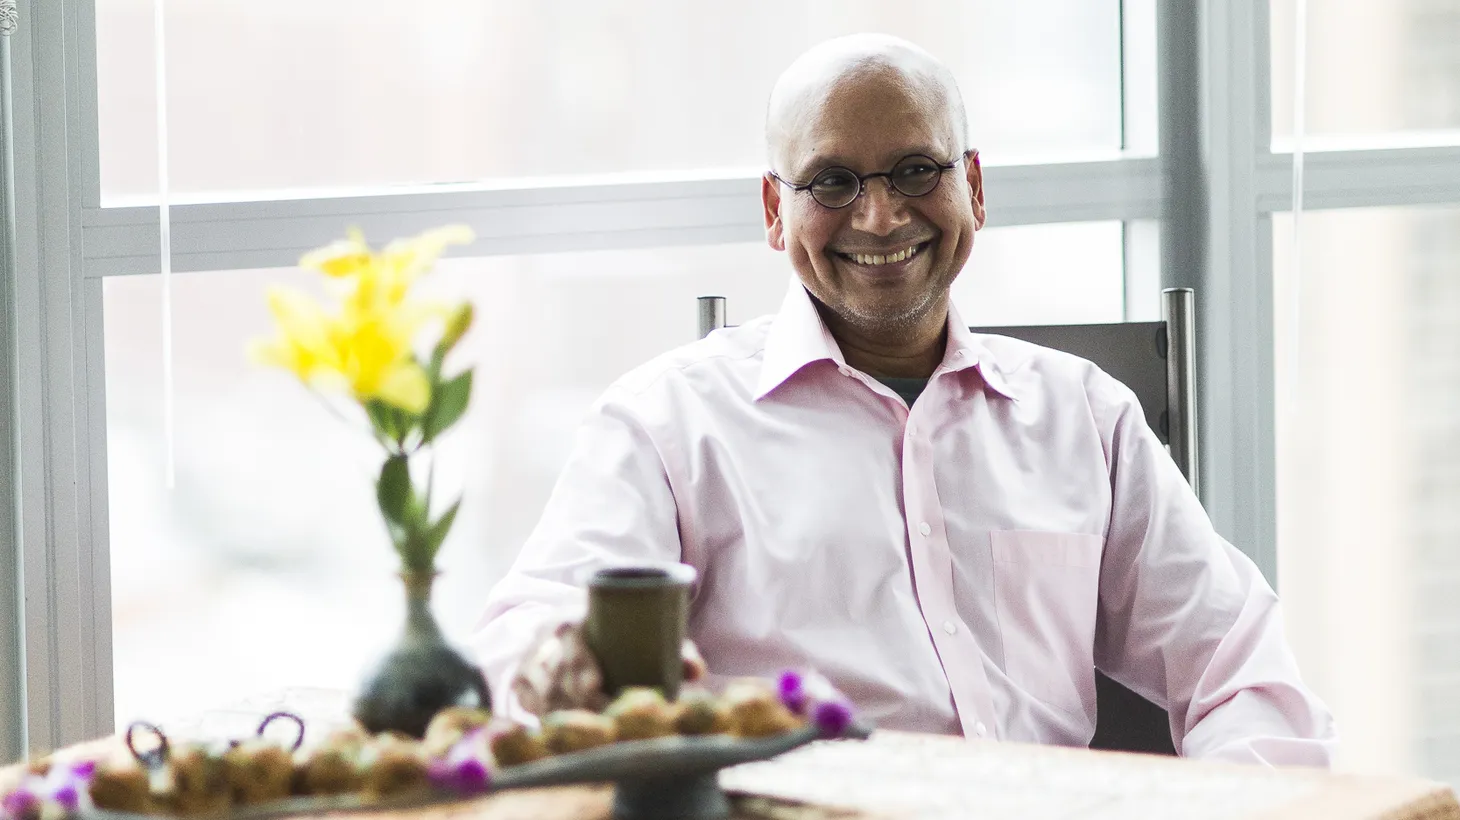 Mumbai-born Raghavan Iyer looks at the diaspora of curries and curry powders through the eyes of the colonials.